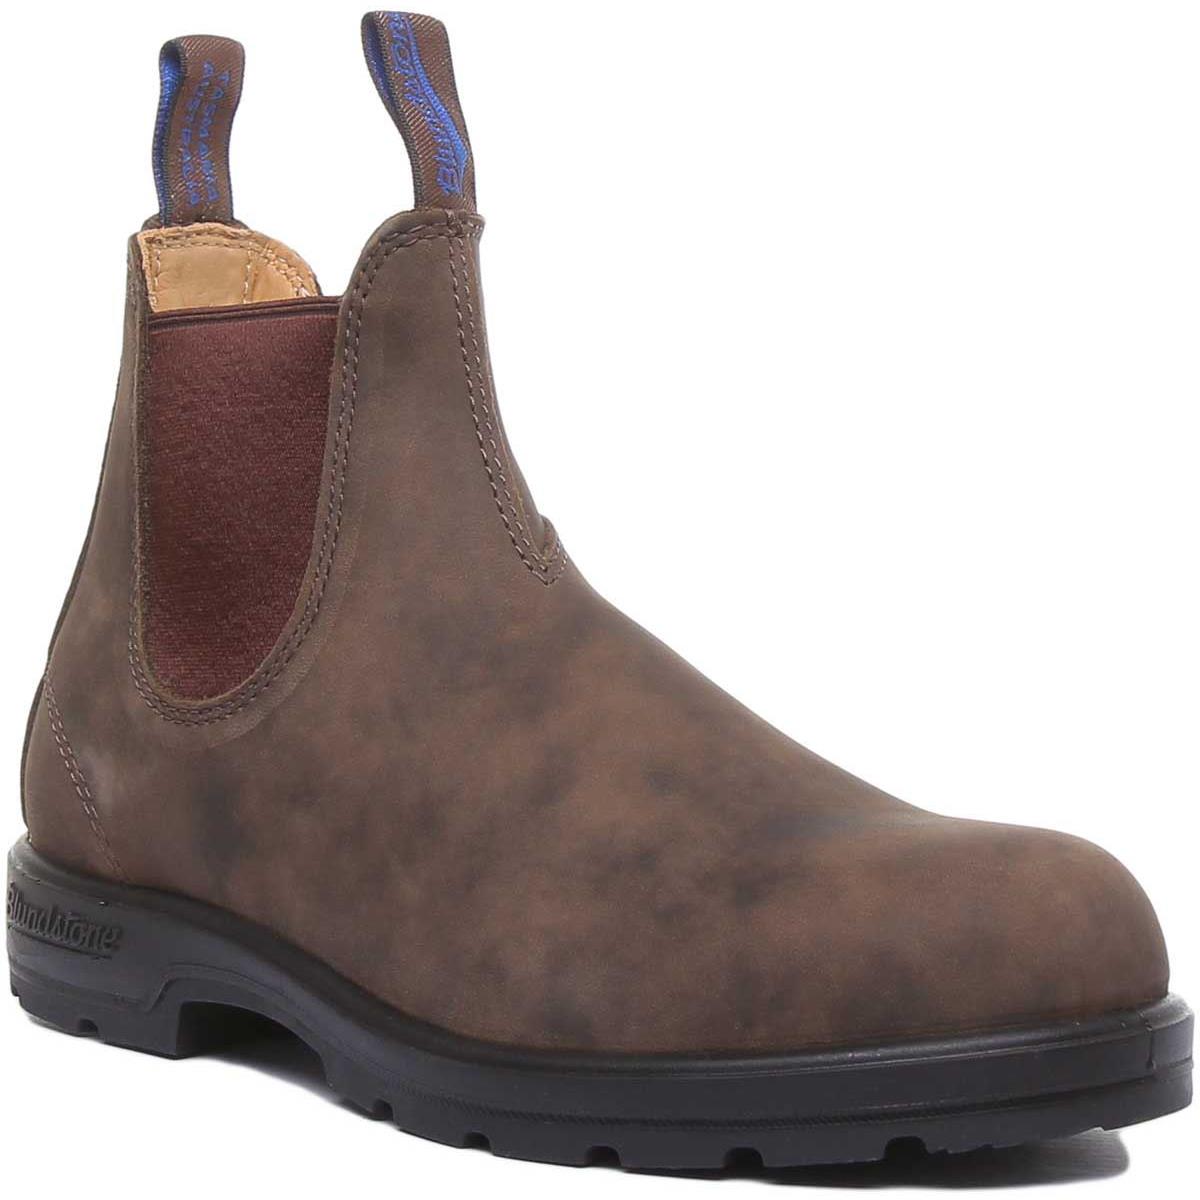 Blundstone 584 Water Resistant Thinsulate In Rust Size US 5 - 11 Rust